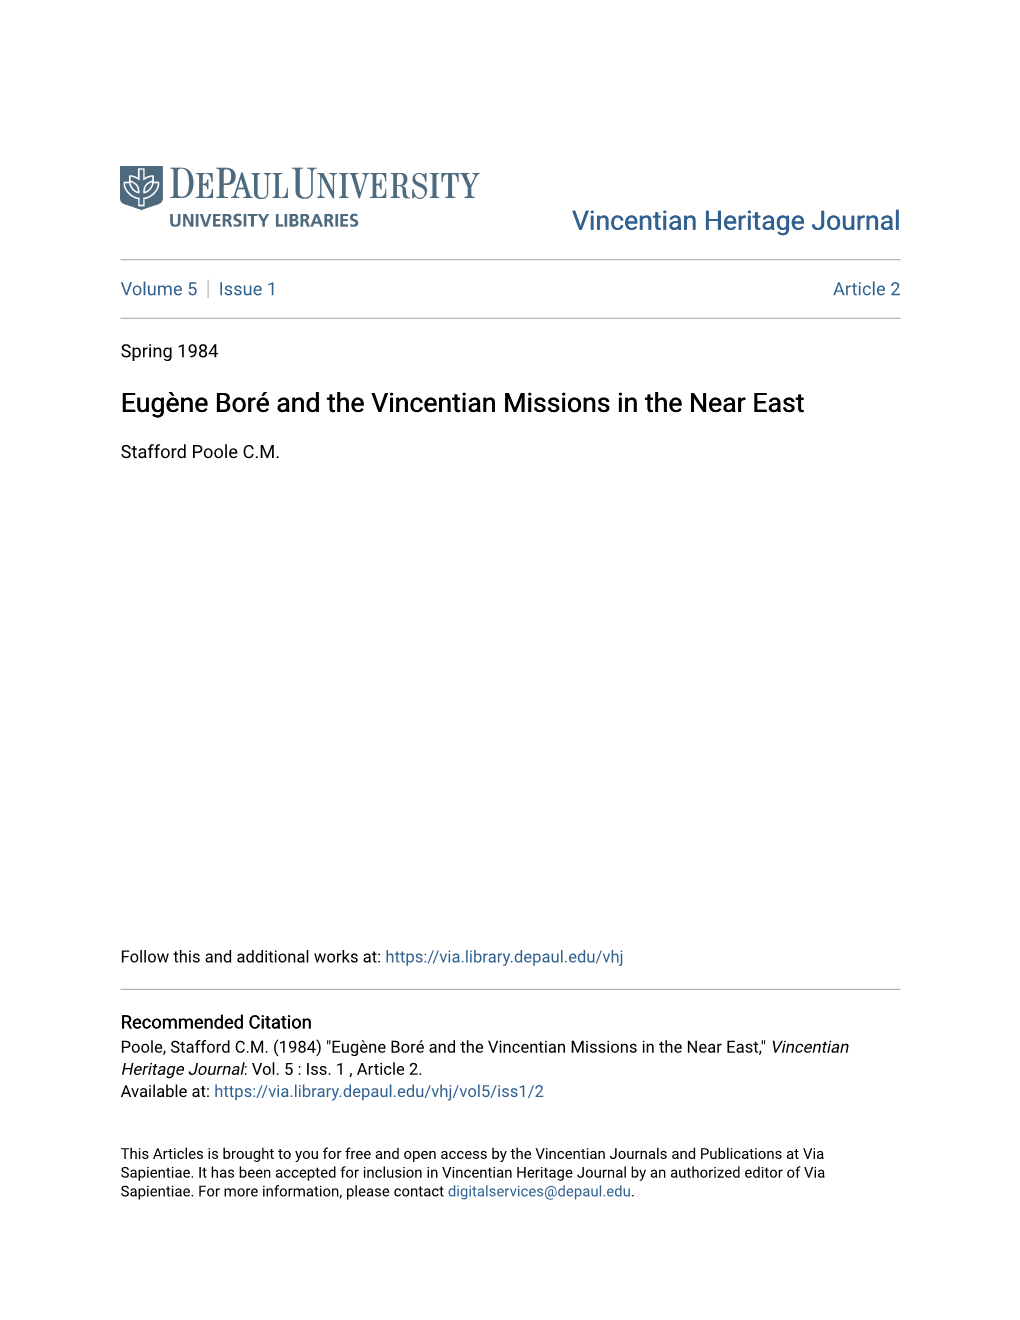 Eugène Boré and the Vincentian Missions in the Near East